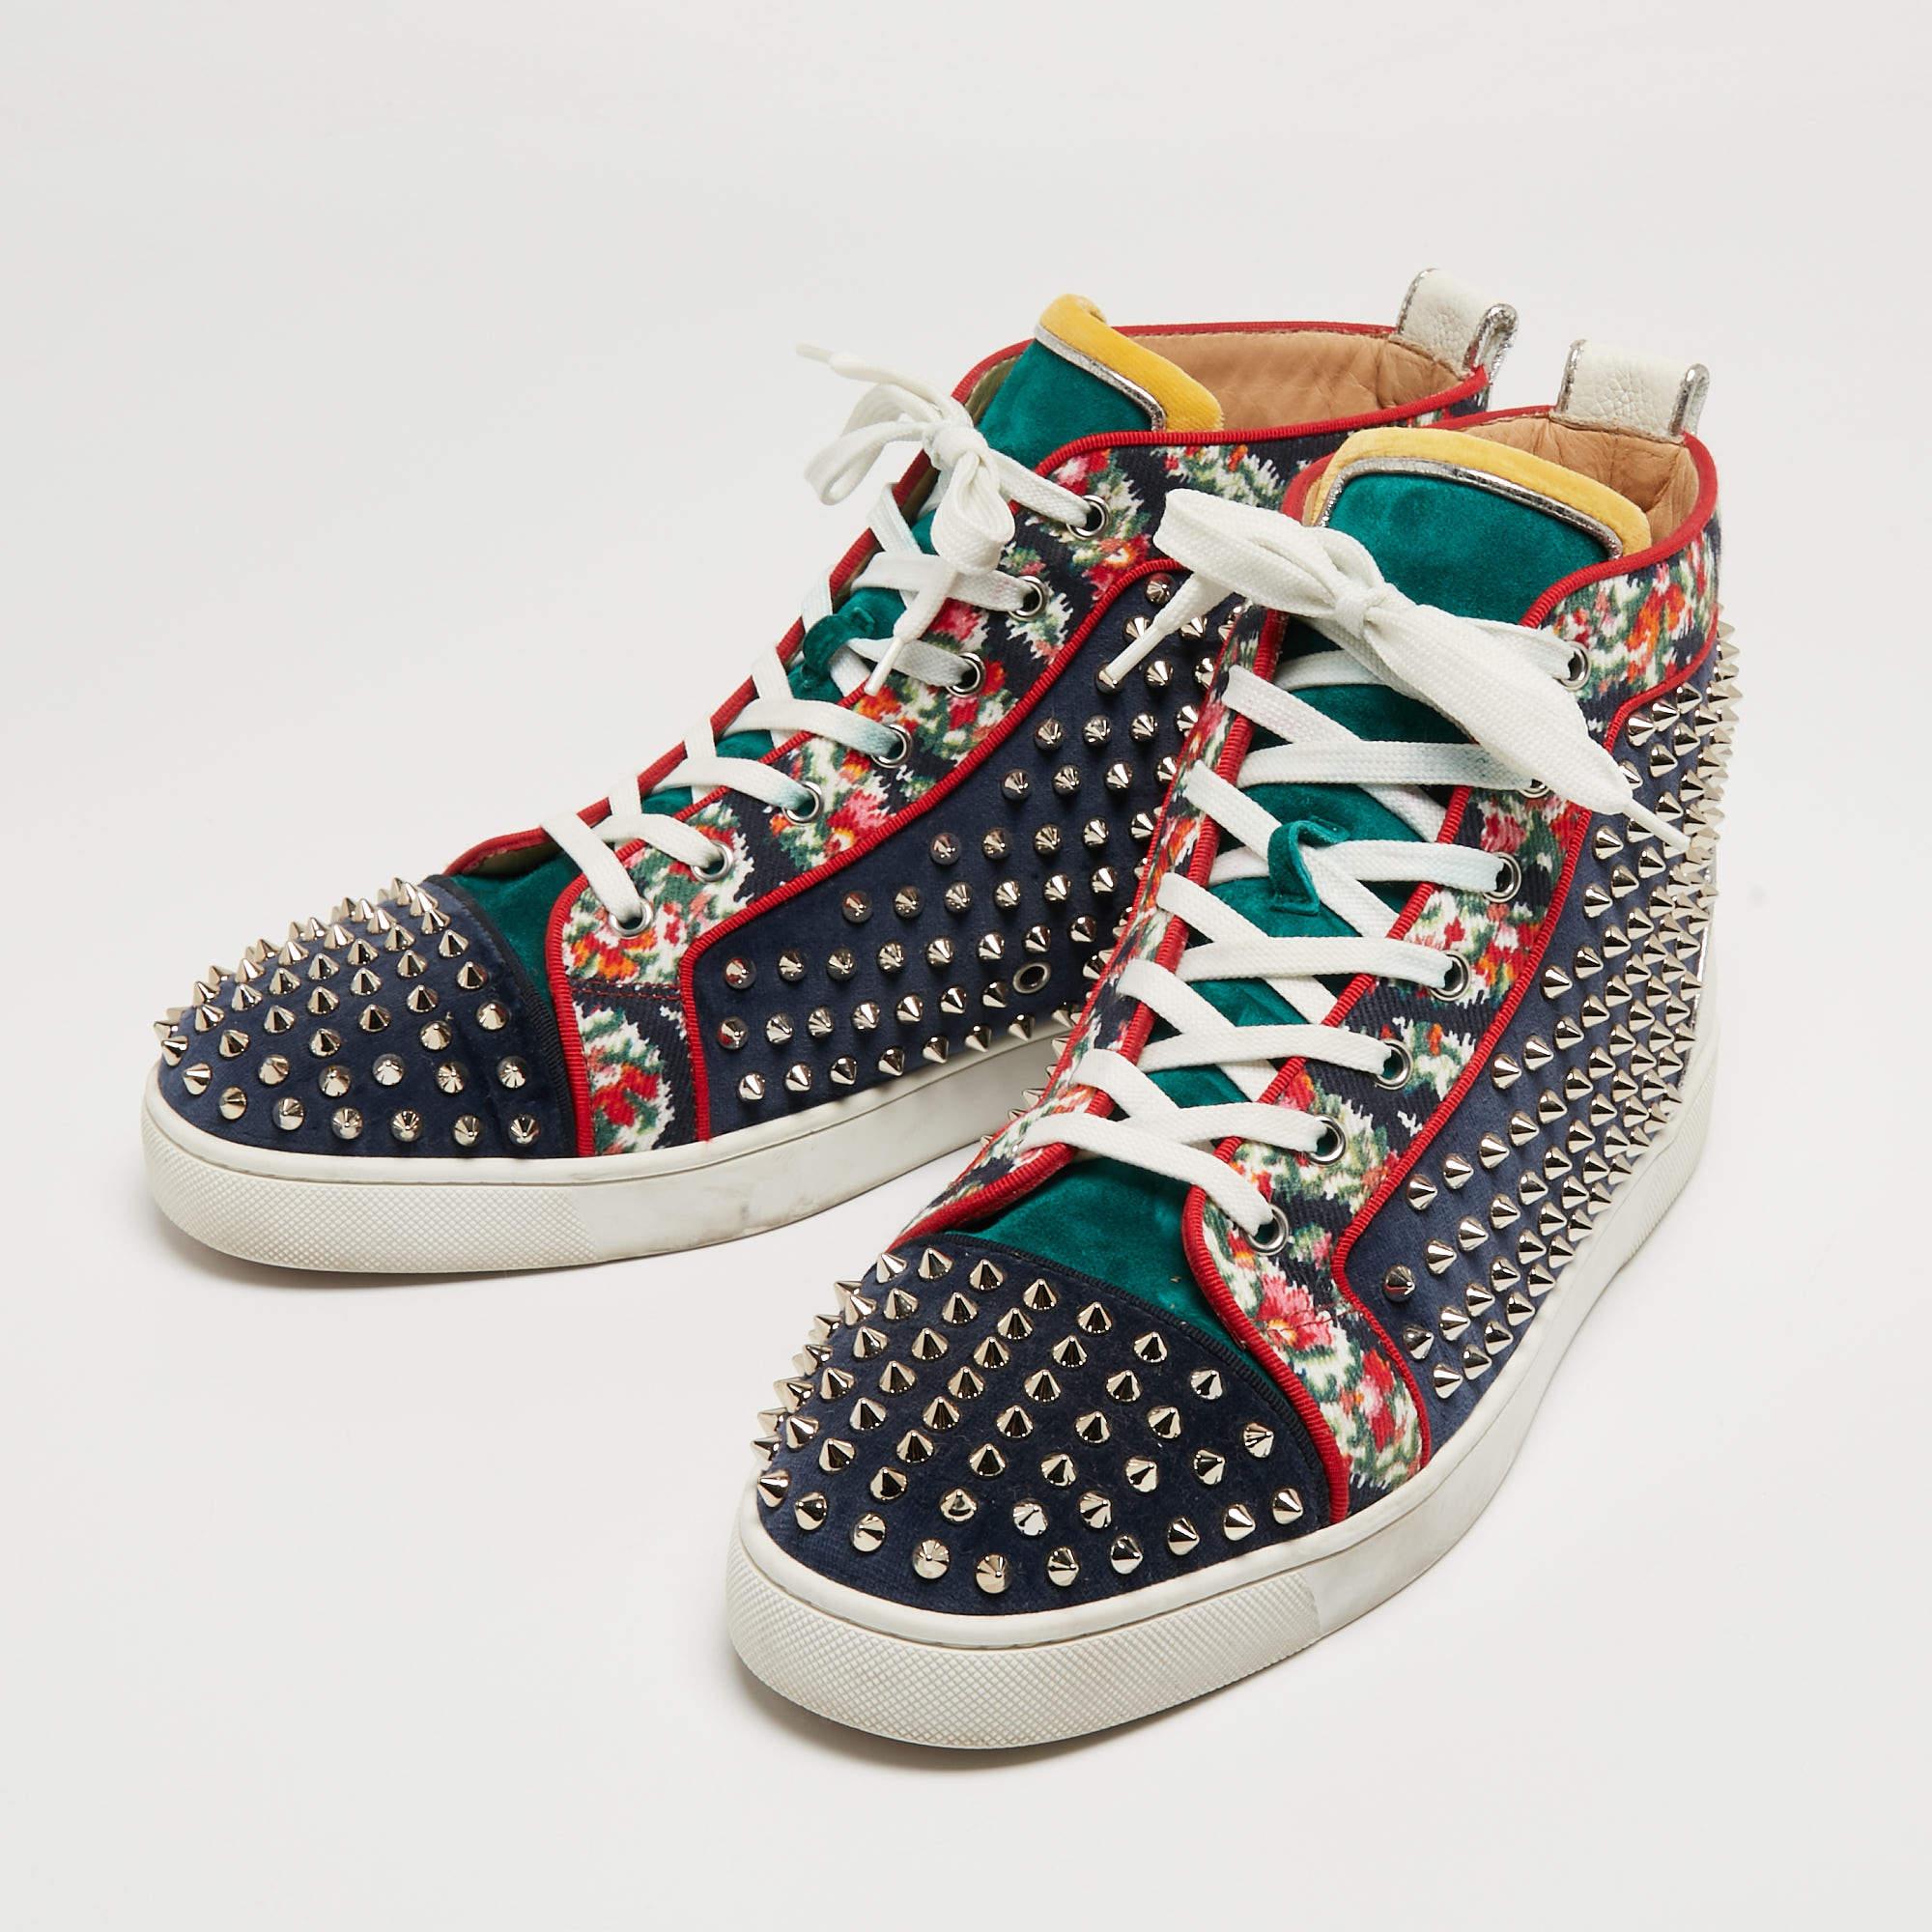 These Christian Louboutin's Louis sneakers are designed in a tricolor leather body with fabric panels and feature trendy spikes detail all over for a bold look. Set on a rubber sole, this pair features contrasting lace-ups and comfortable insoles